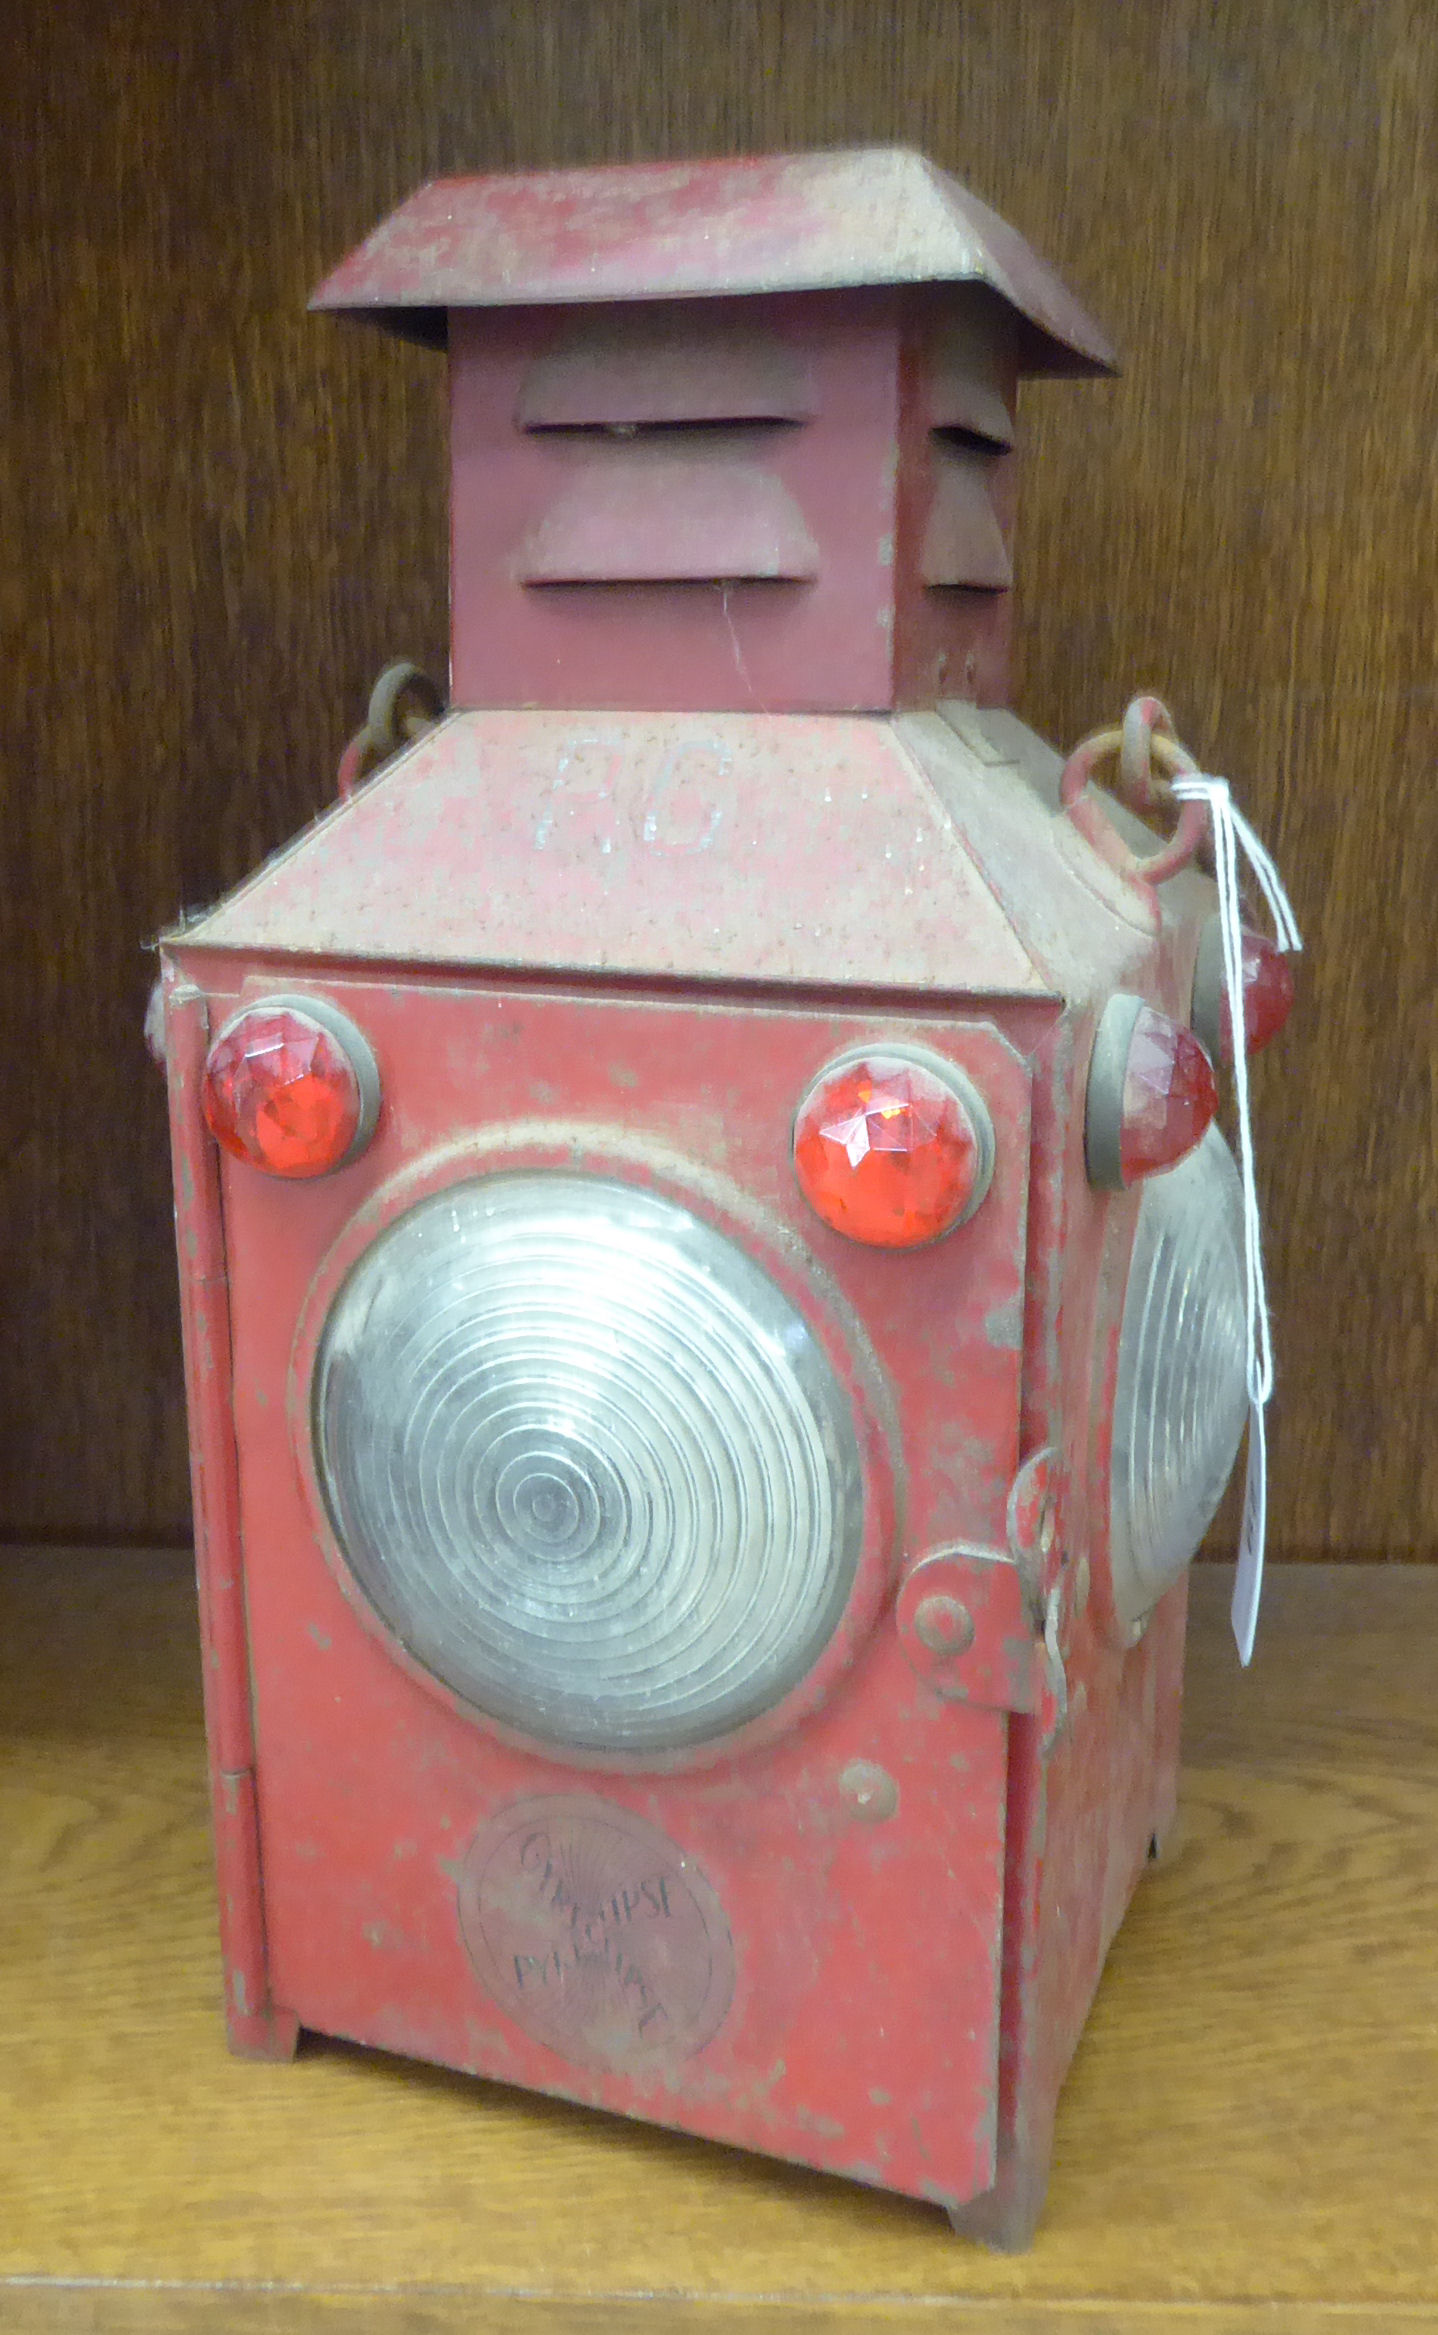 A Gyreclipse red painted tinplate railway lantern of box design with clear glass windows and red